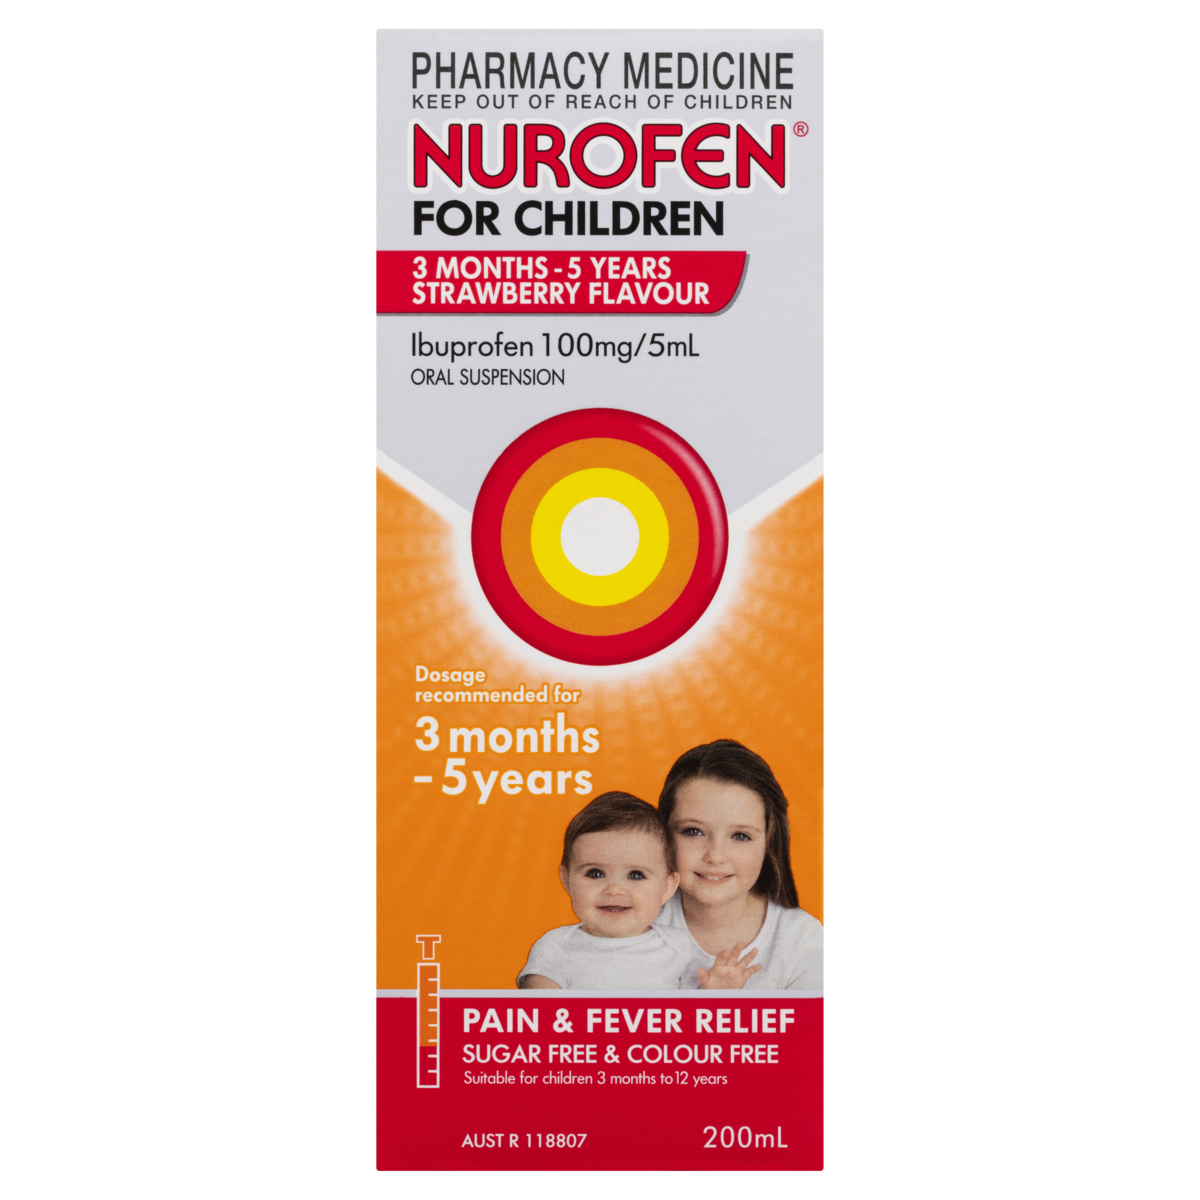 Concentrated Motrin Infant Drops Dosage Chart